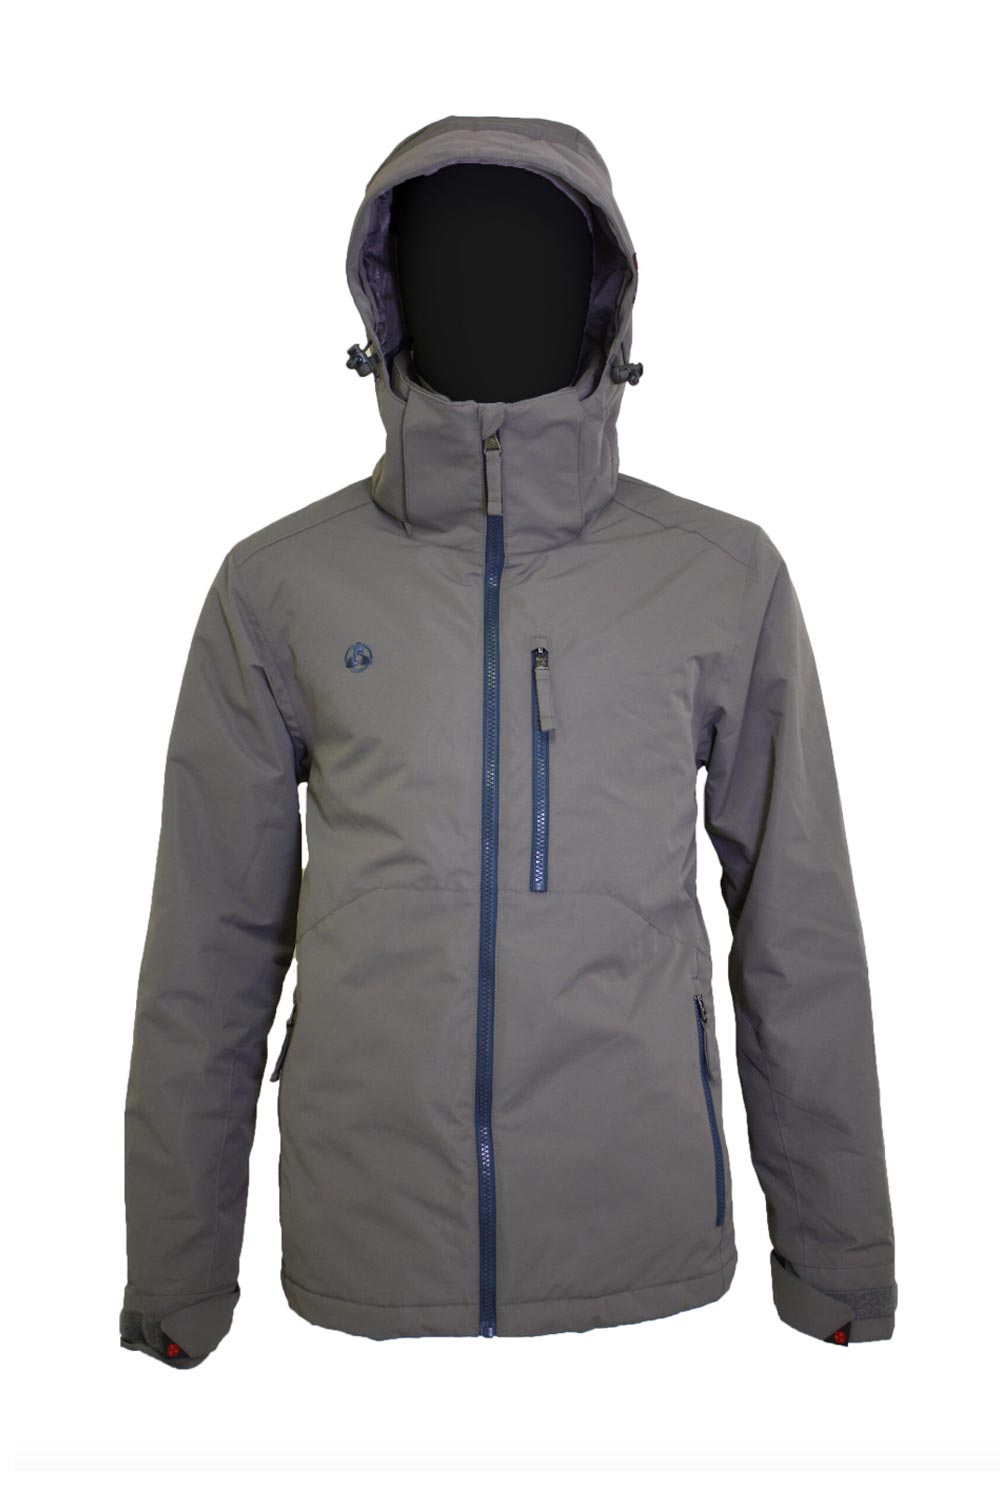 men's Turbine Boot Pack ski jacket, gray with blue accents